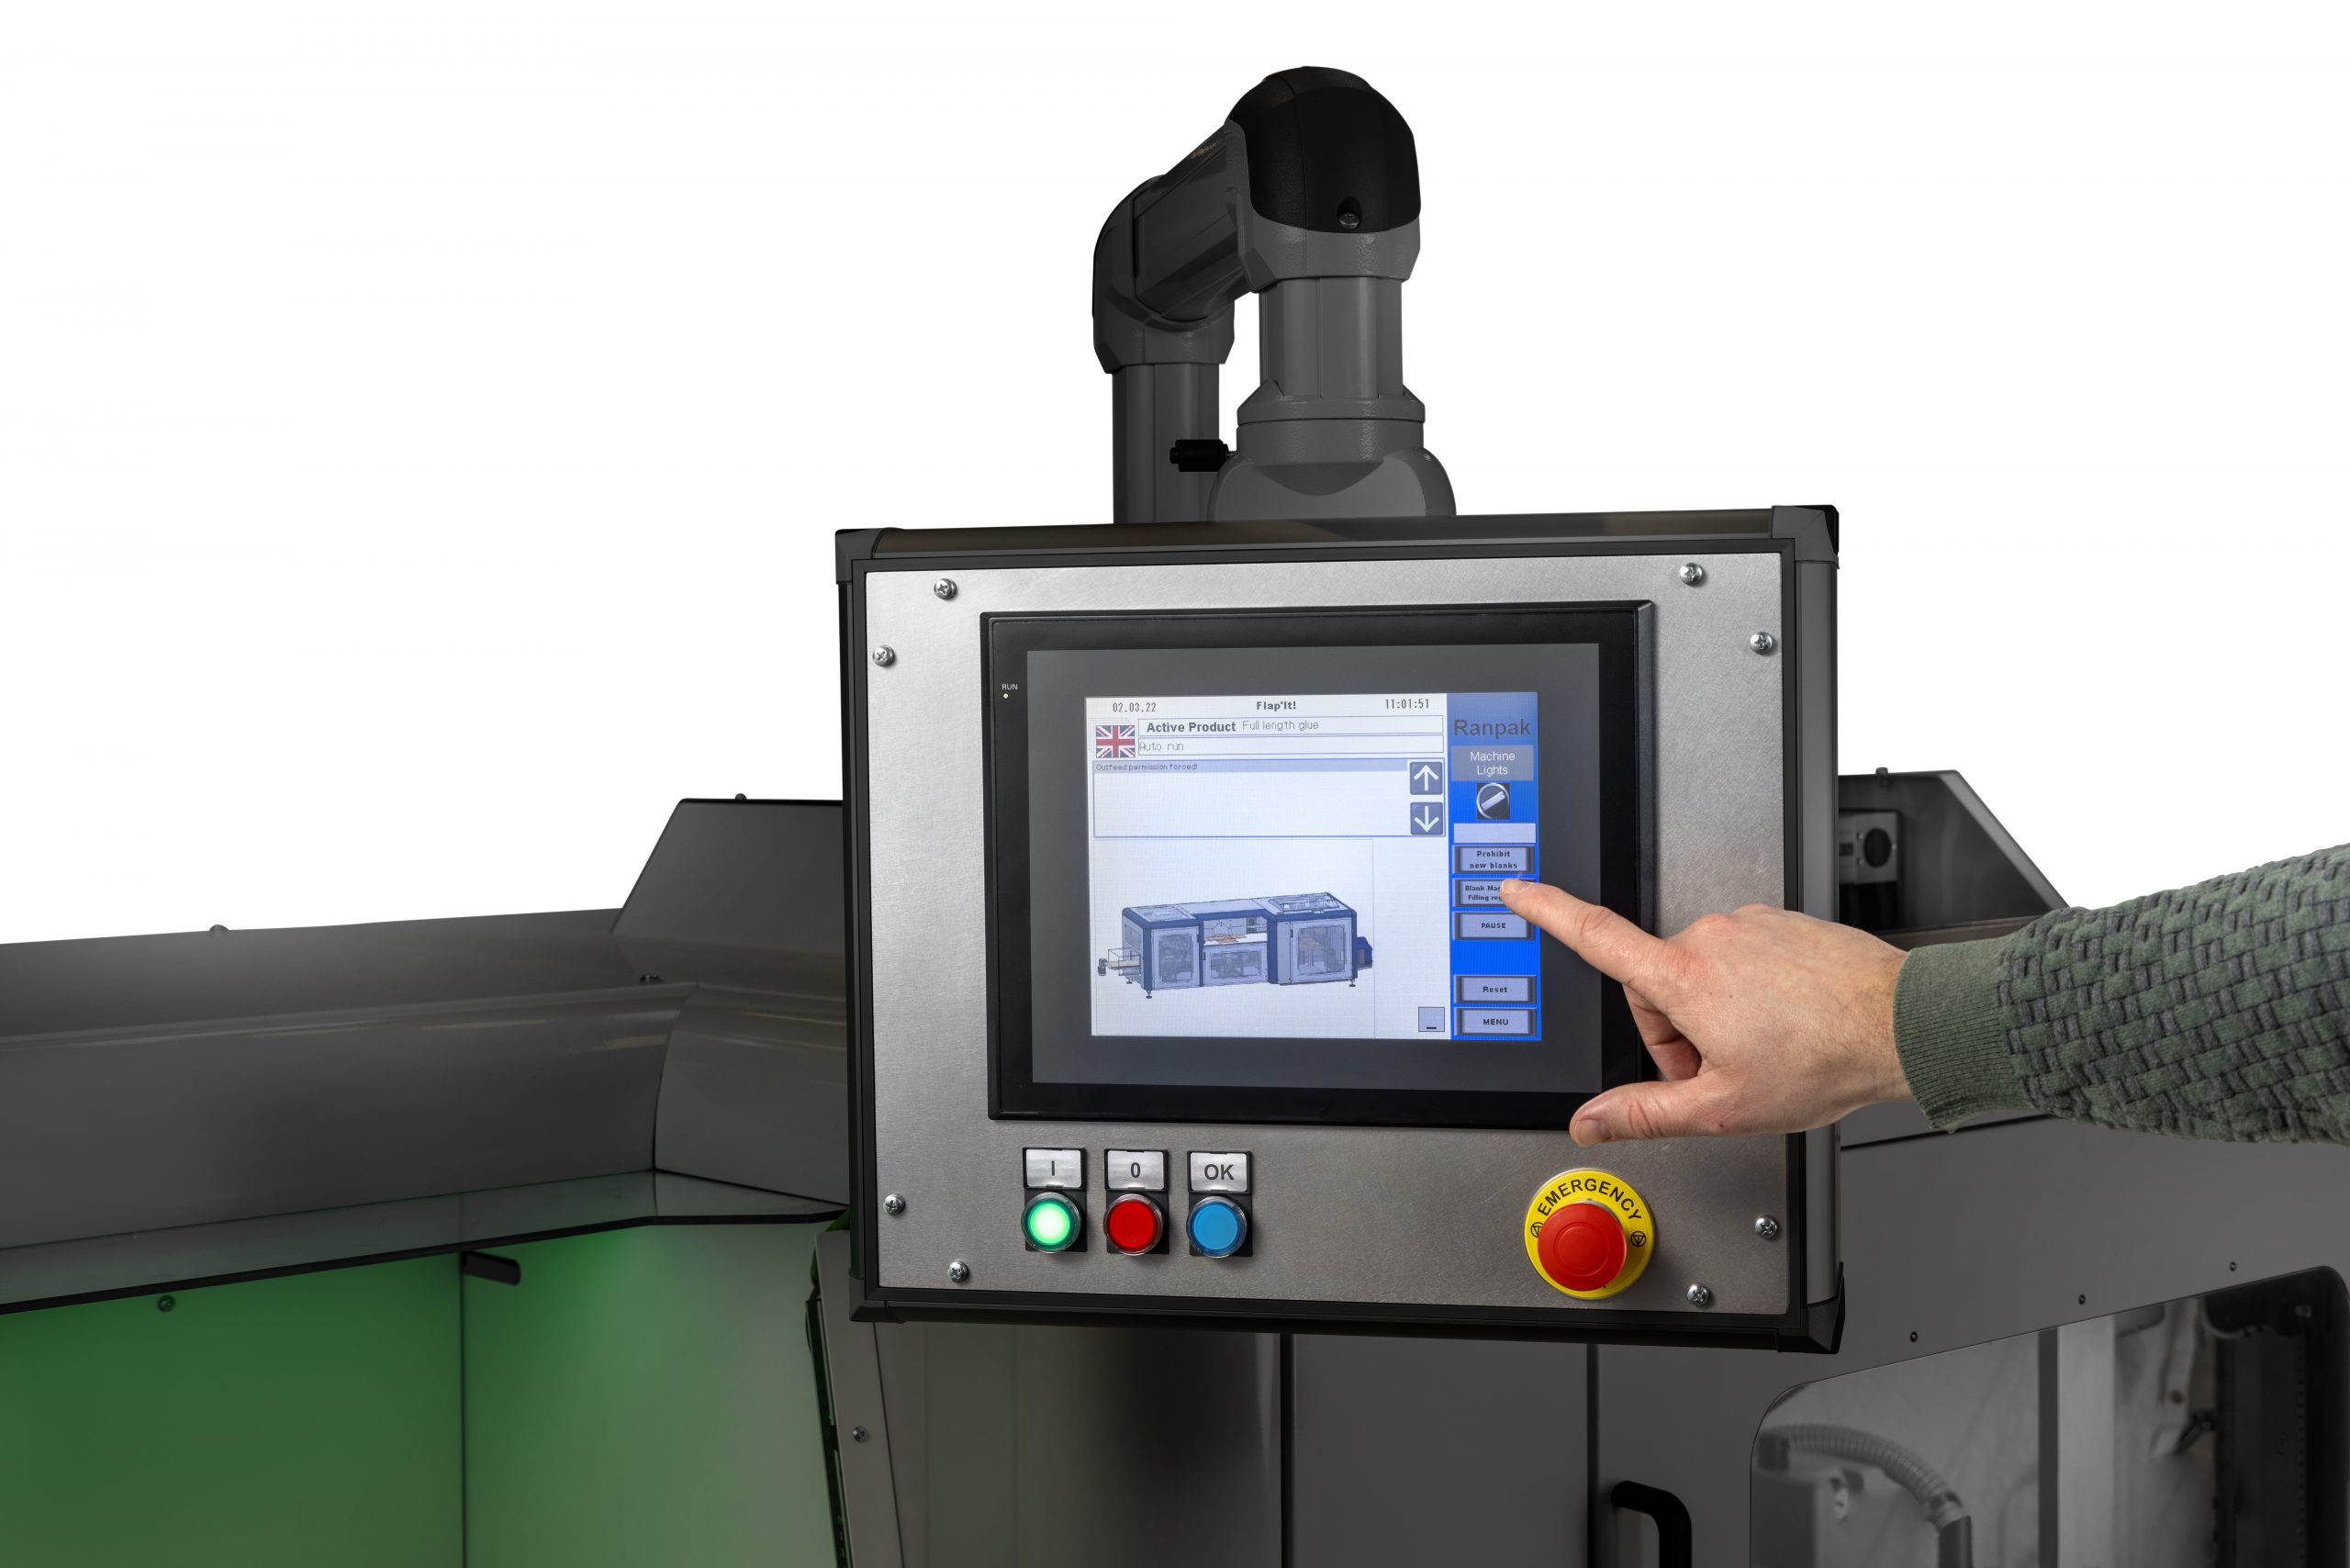 An intuitive touch screen enables operators to easily control and/or troubleshoot Flap’It!